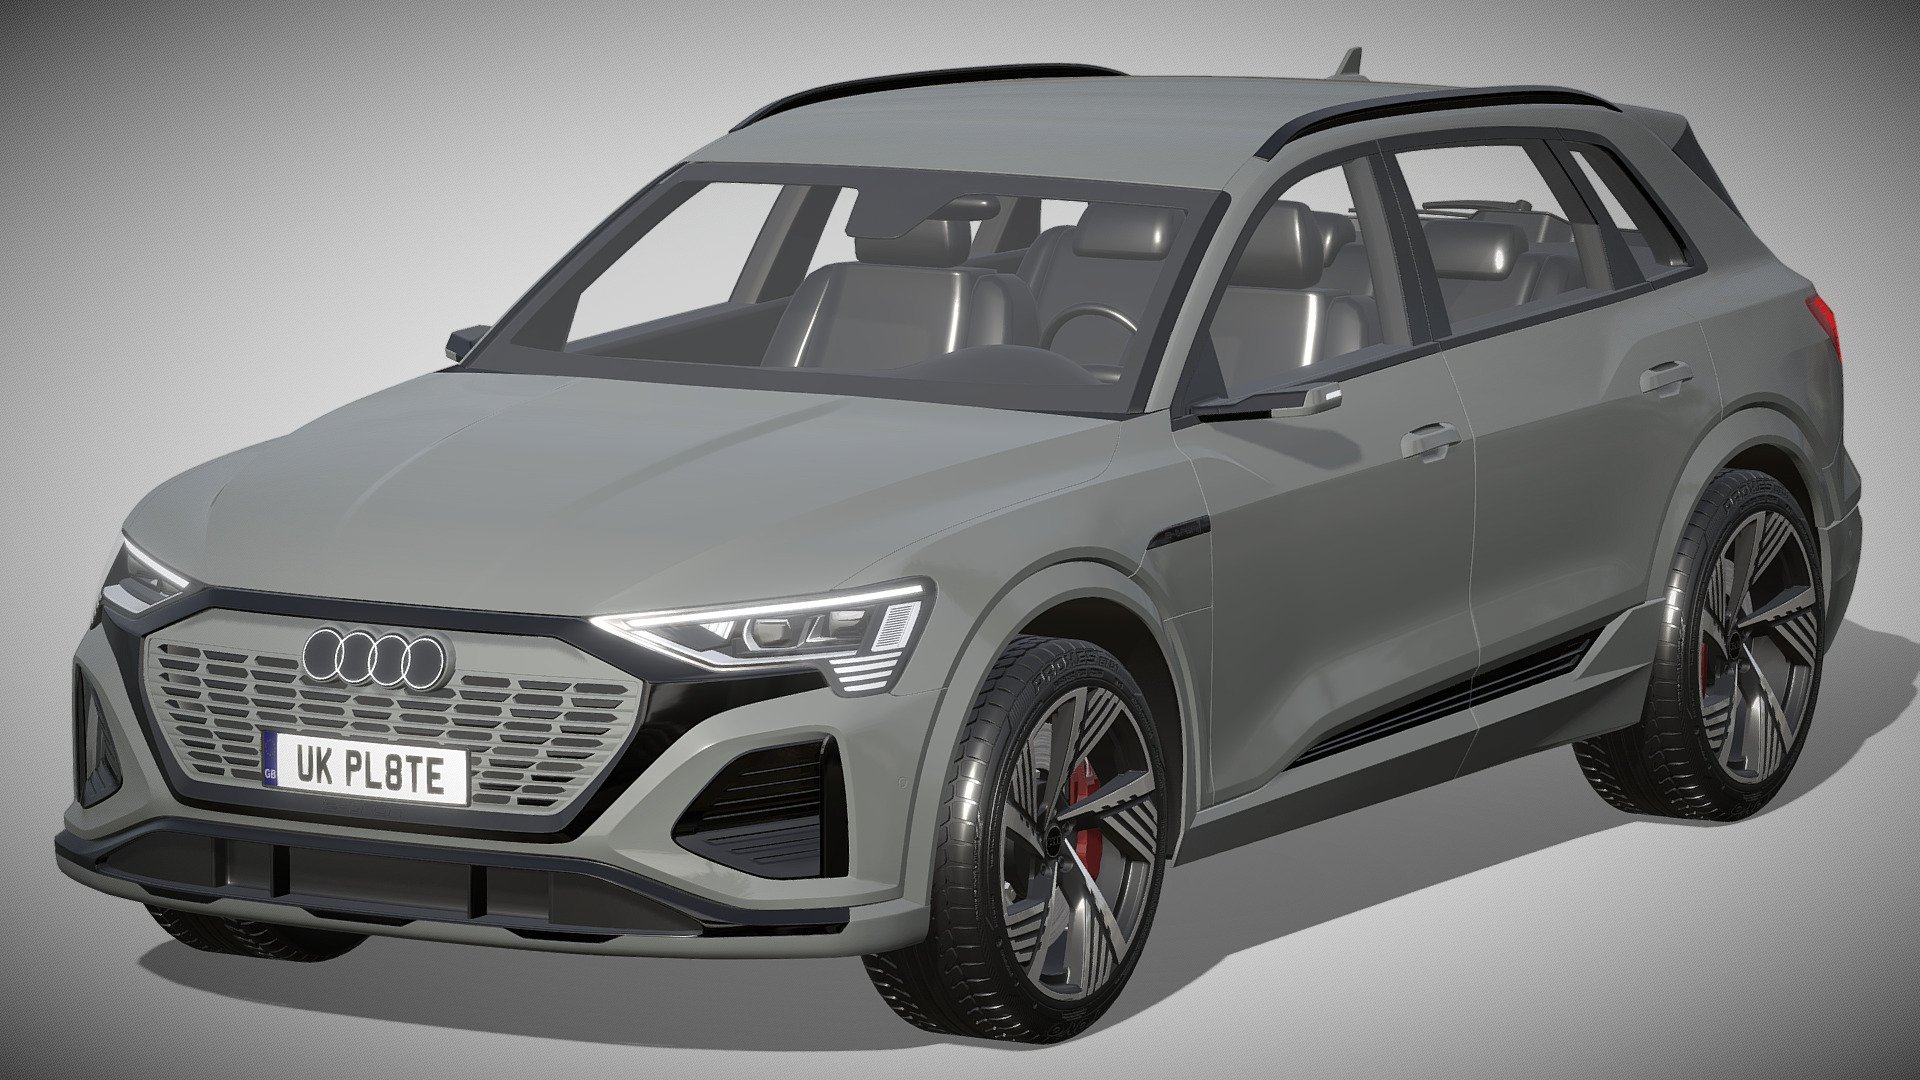 Audi Q8 e-tron

https://www.audi.de/de/brand/de/neuwagen/q8-e-tron/q8-e-tron.html

Clean geometry Light weight model, yet completely detailed for HI-Res renders. Use for movies, Advertisements or games

Corona render and materials

All textures include in *.rar files

Lighting setup is not included in the file! - Audi Q8 e-tron - Buy Royalty Free 3D model by zifir3d 3d model